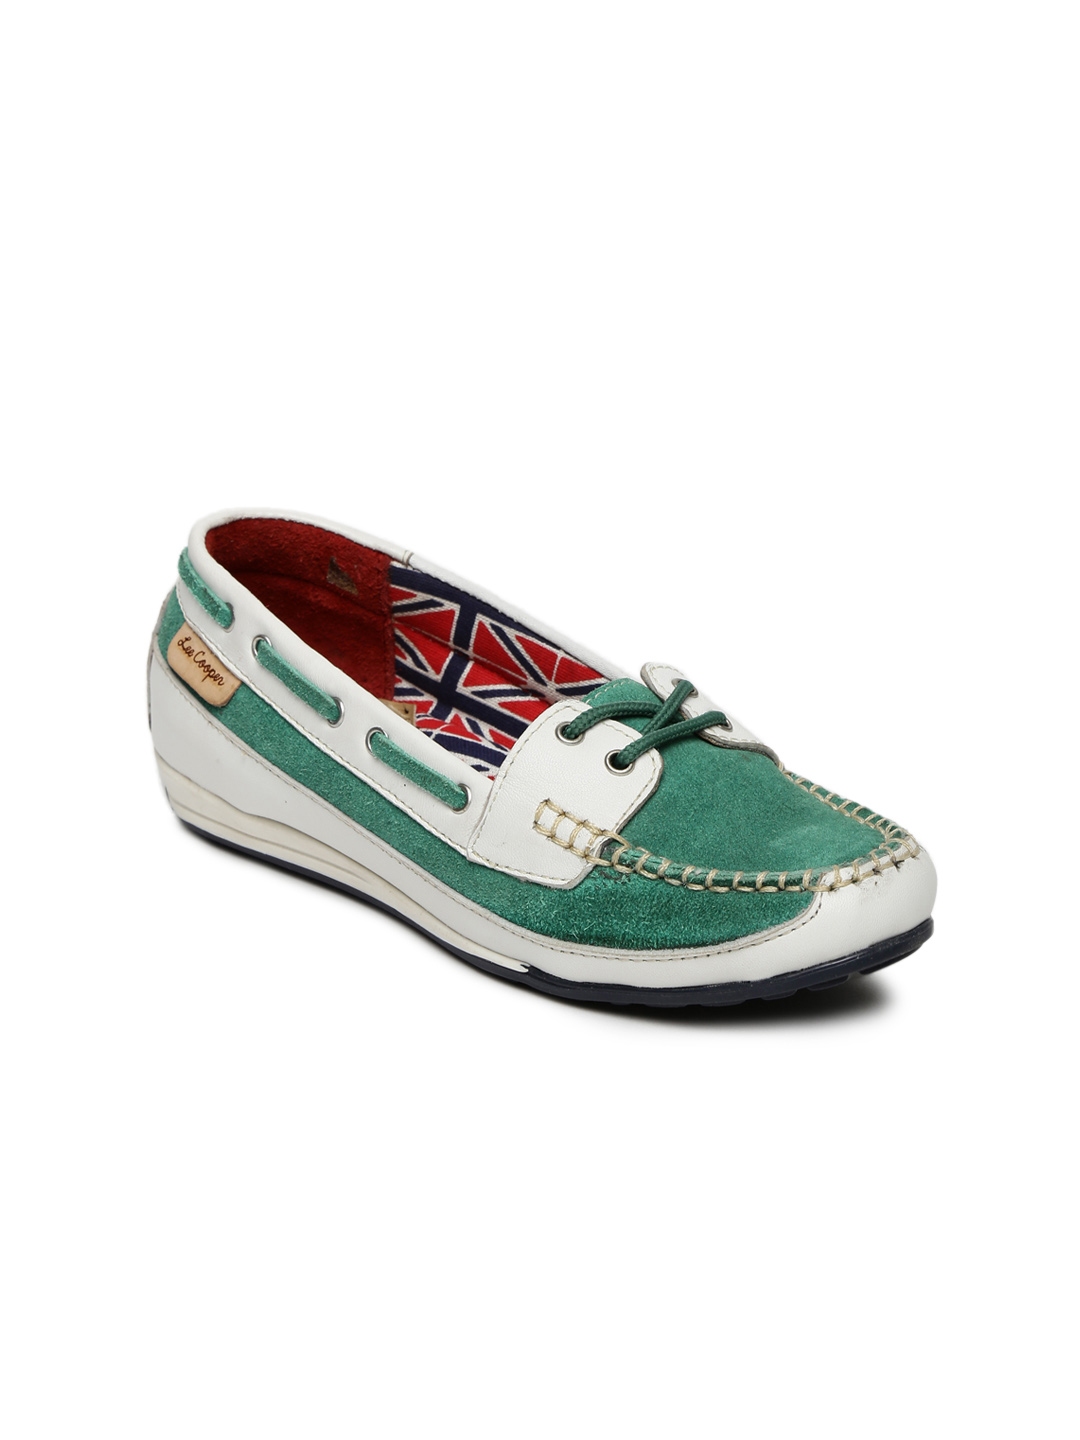 teal boat shoes